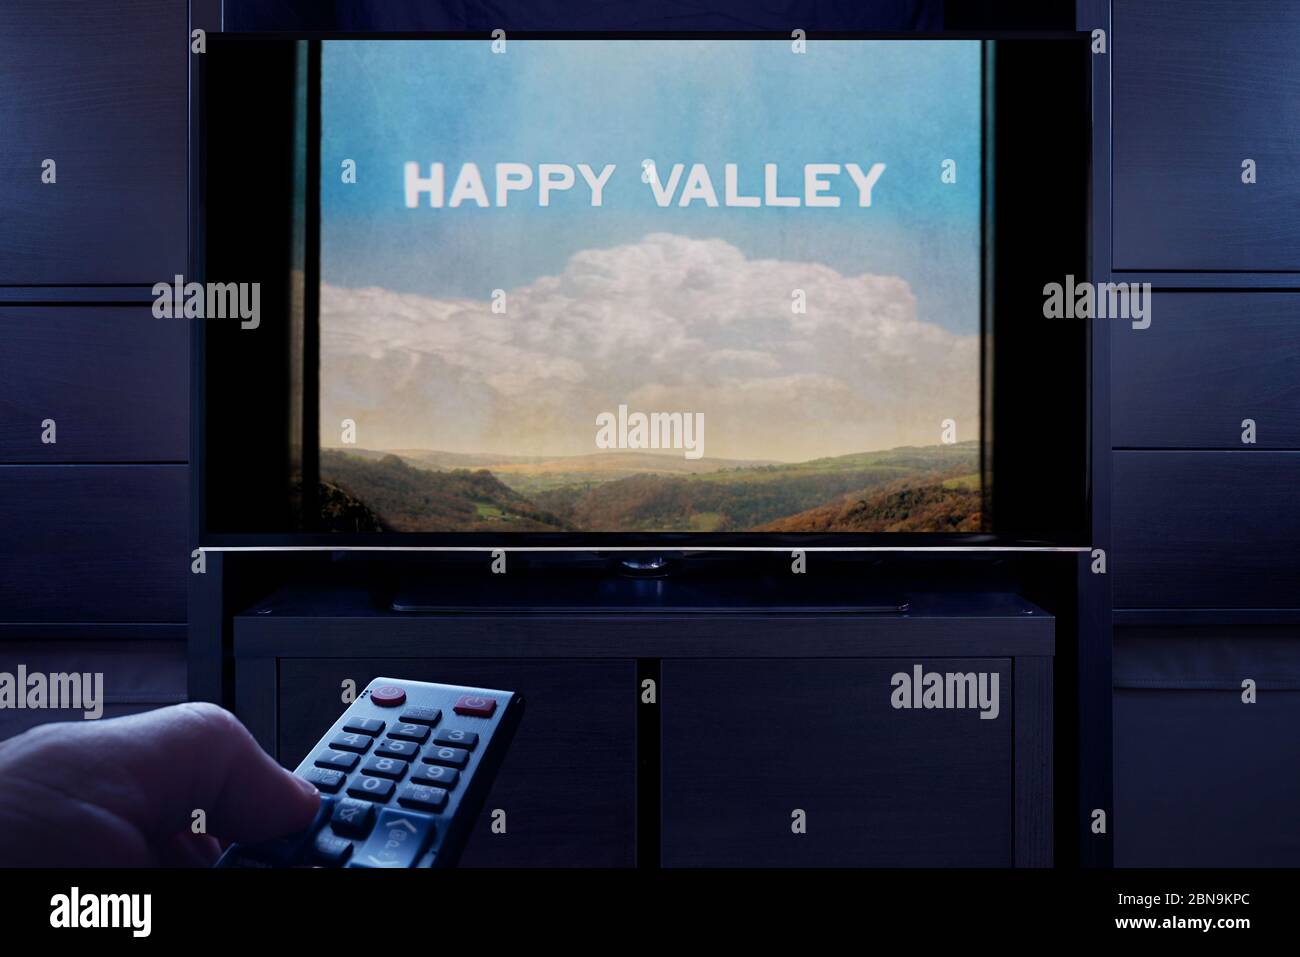 A man points a TV remote at the television which displays the Happy Valley main title screen (Editorial use only). Stock Photo